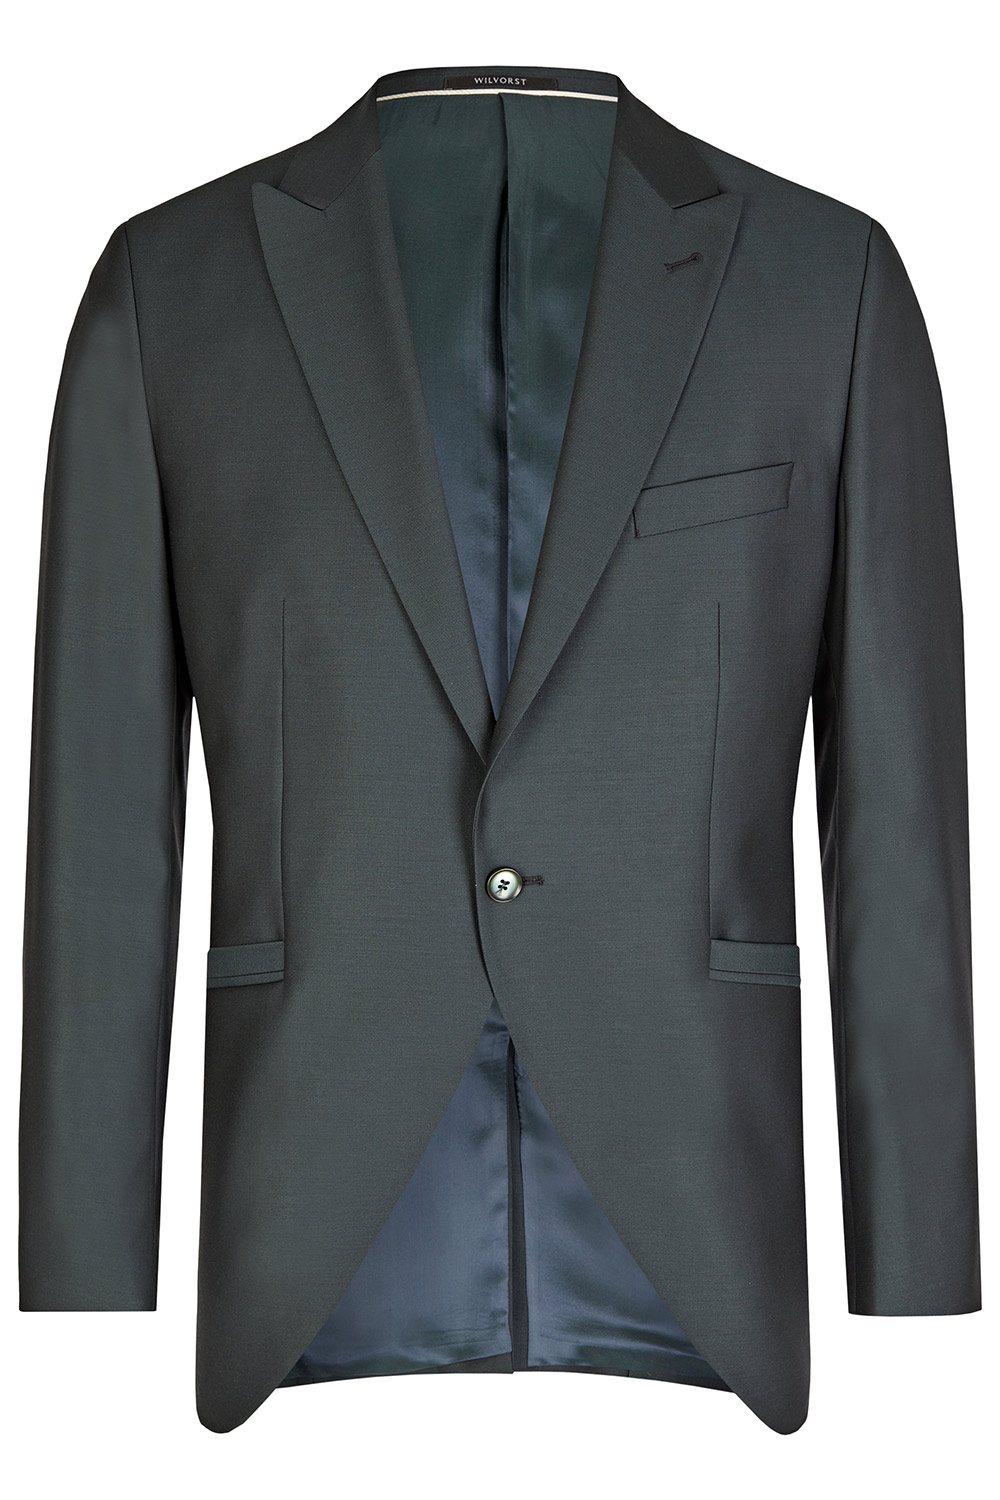 Forest Green 3 piece Wedding Suit - Tom Murphy's Formal and Menswear